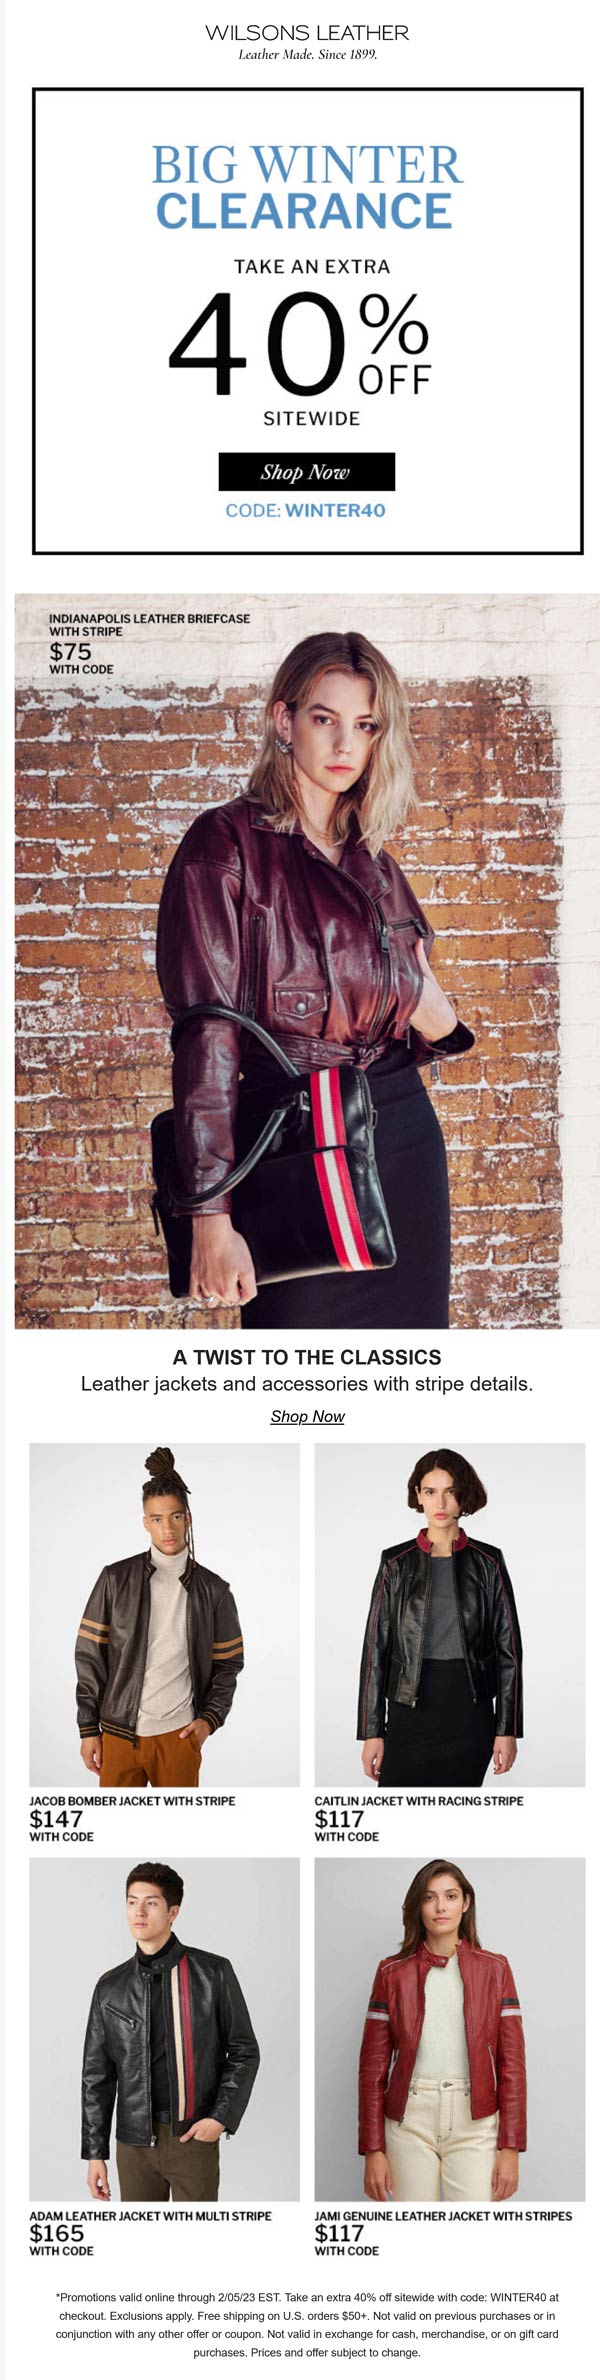 Wilsons Leather stores Coupon  Extra 40% off everything online at Wilsons Leather via promo code WINTER40 #wilsonsleather 